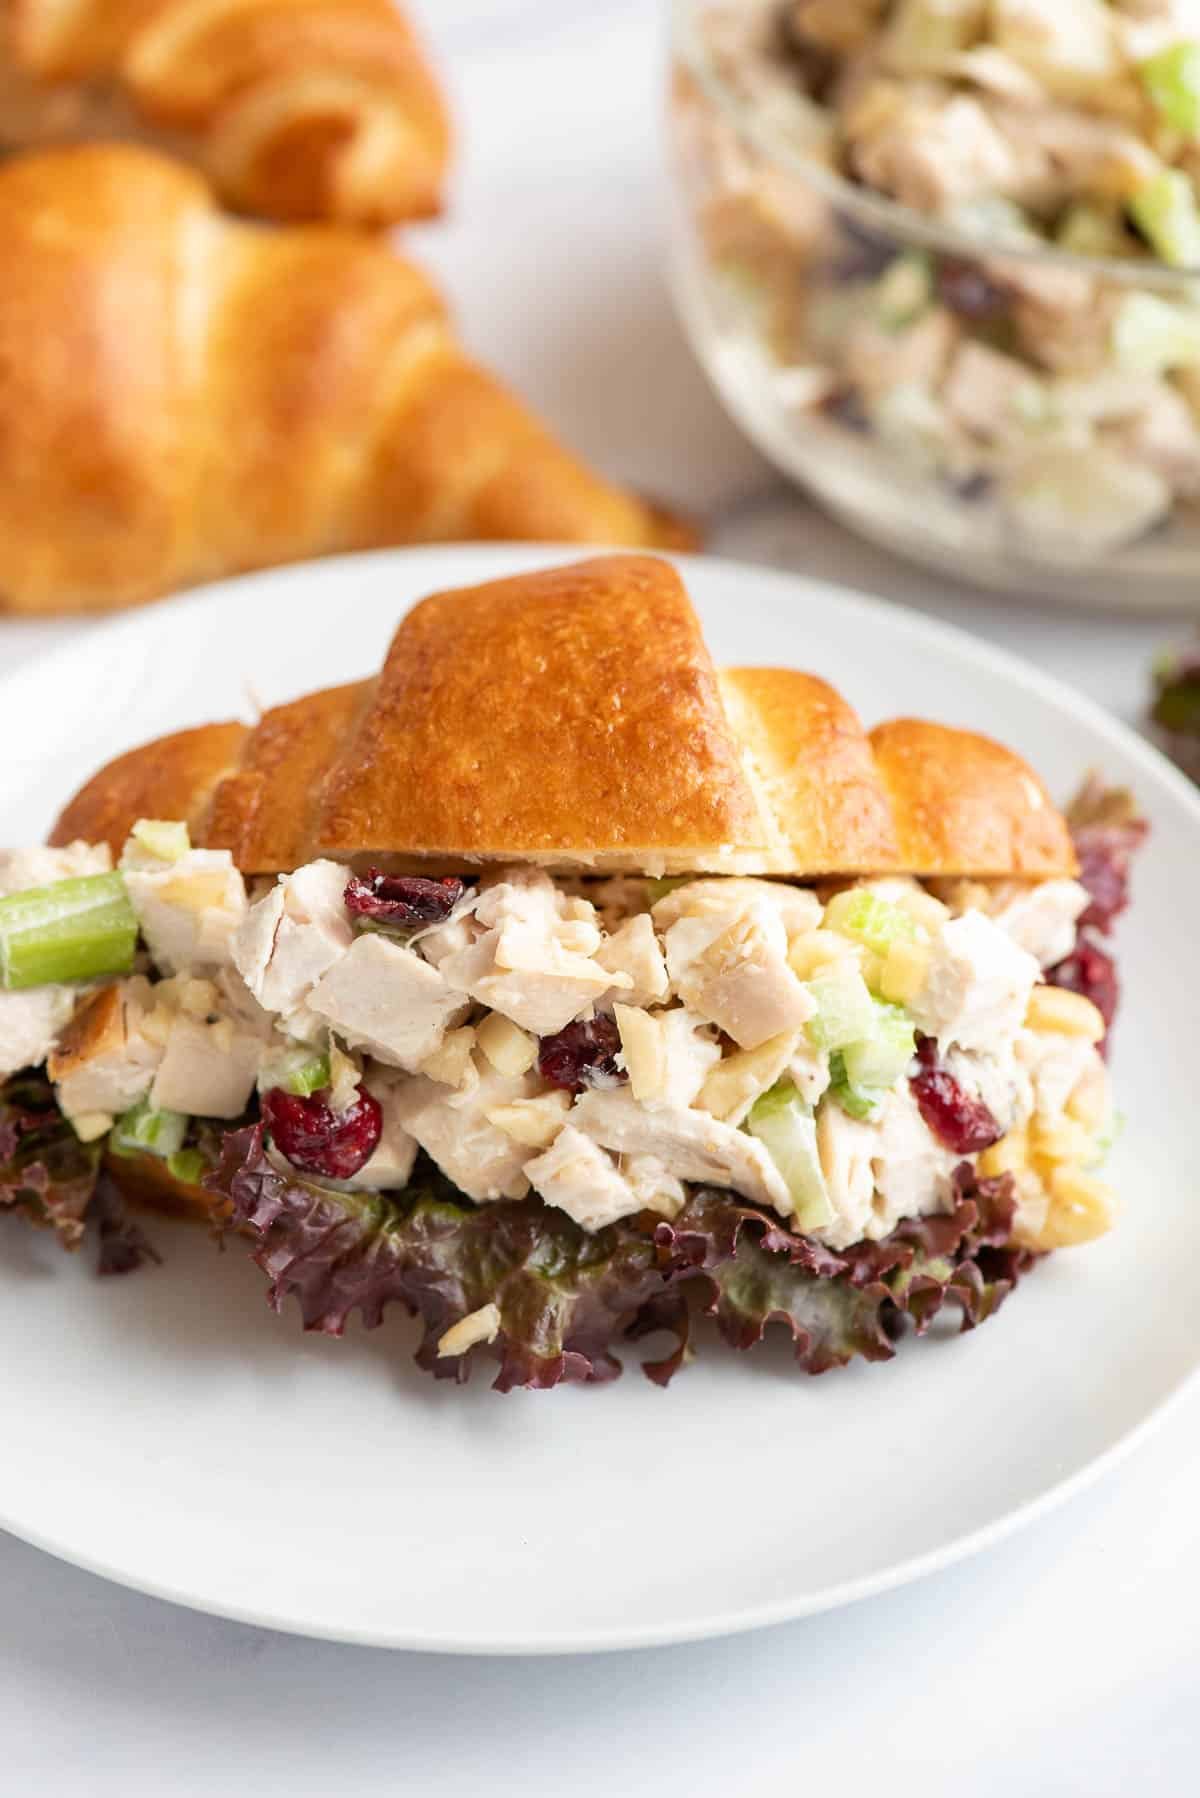 cranberry chicken salad on croissant close up.